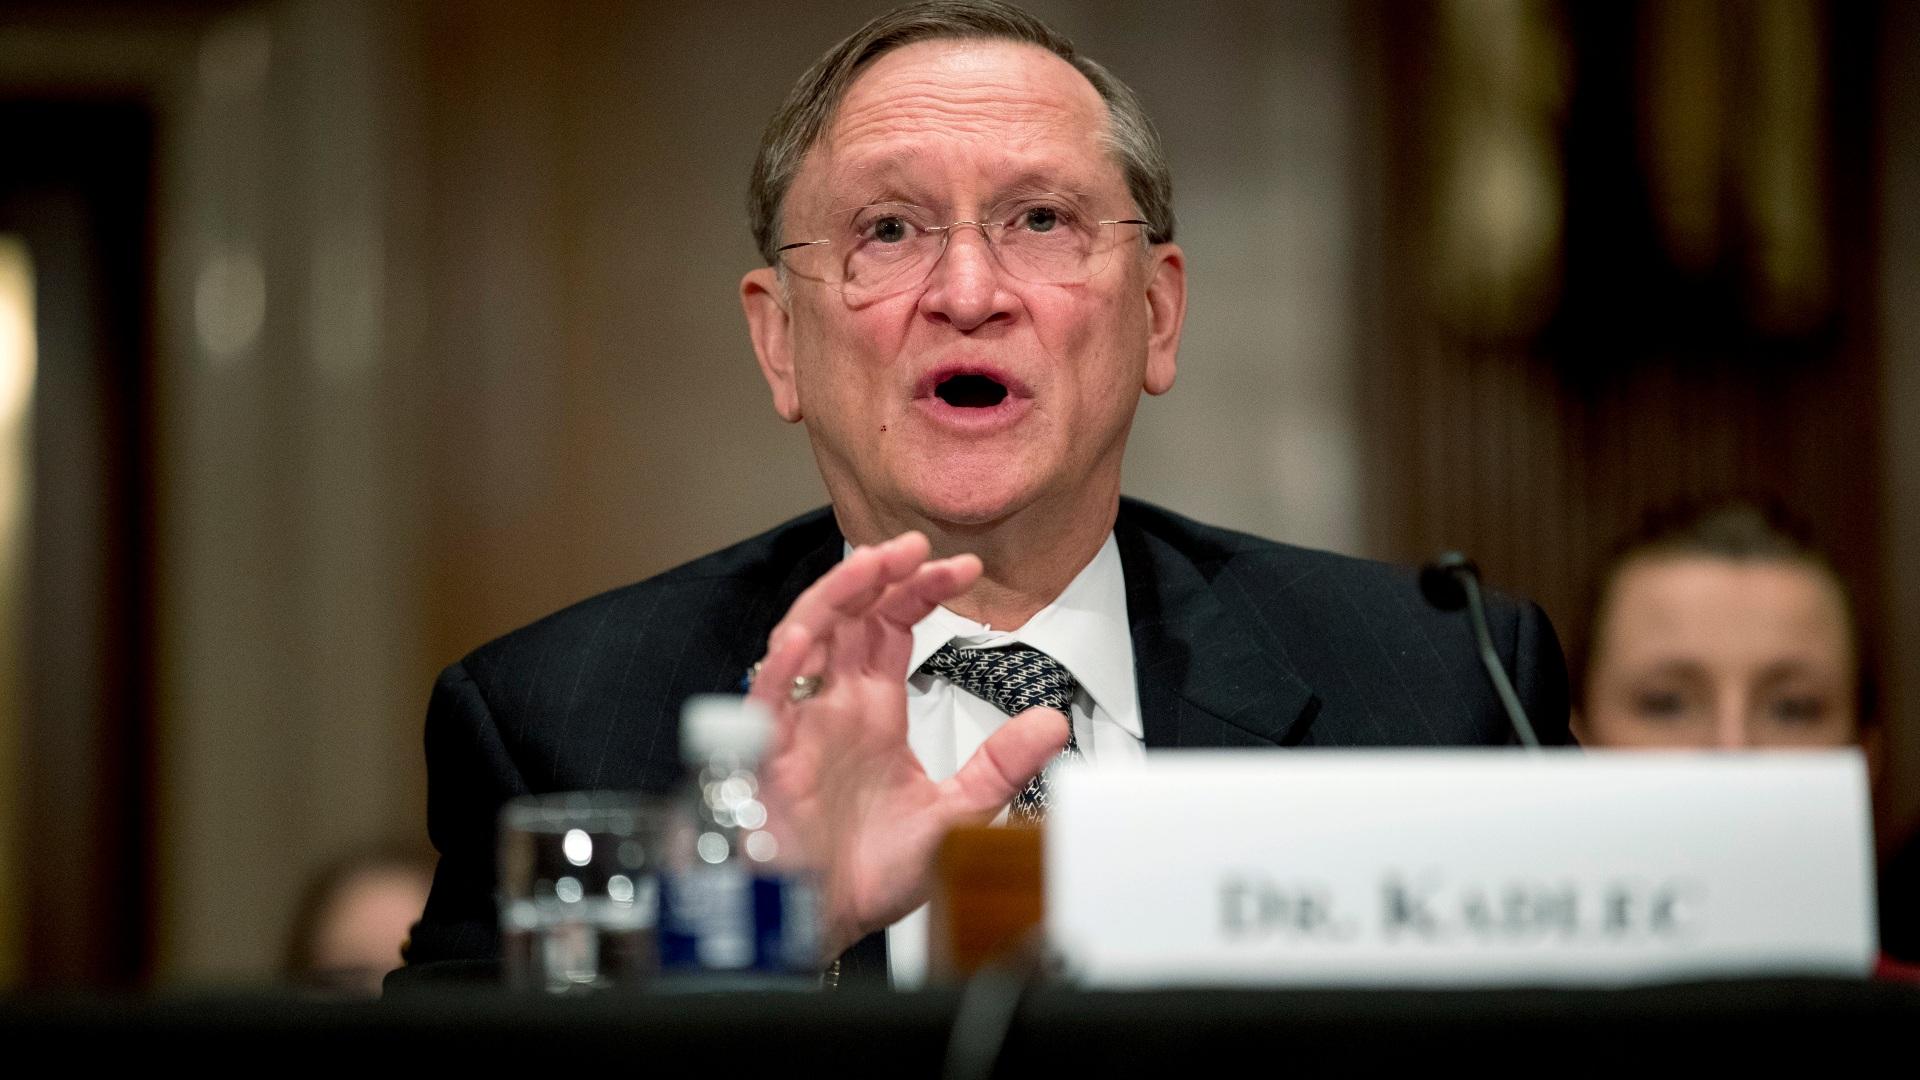 In this March 3, 2020 file photo, Health and Human Services Assistant Secretary for Preparedness and Response Dr. Robert Kadlec testifies before a Senate Education, Labor and Pensions Committee hearing on the coronavirus on Capitol Hill in Washington. (AP Photo / Andrew Harnik)